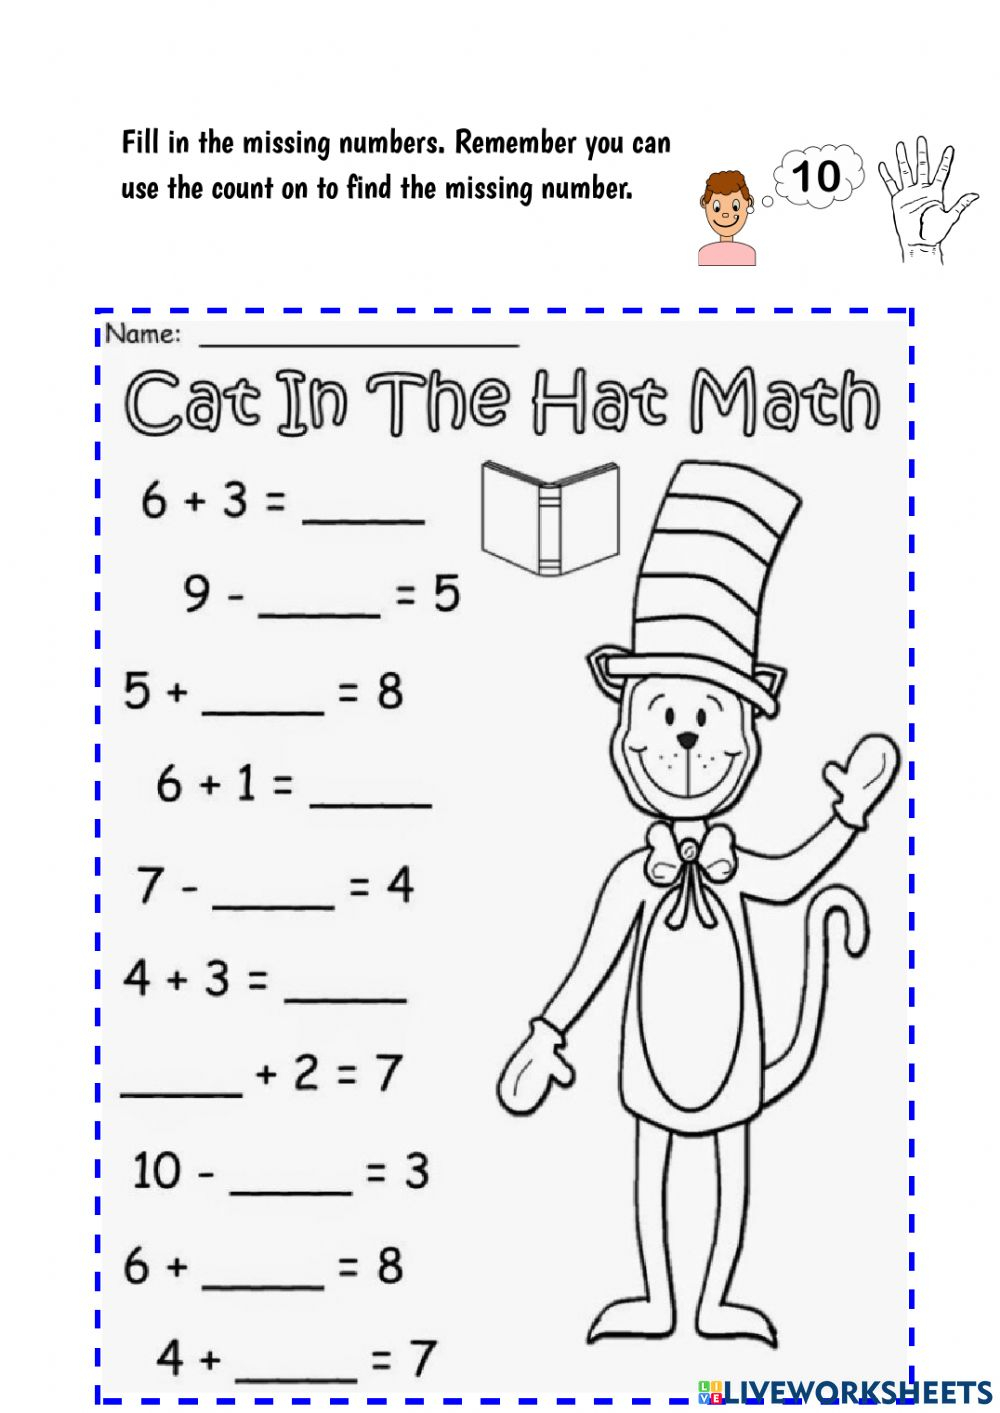 Cat In The Hat Math Missing Numbers Worksheet